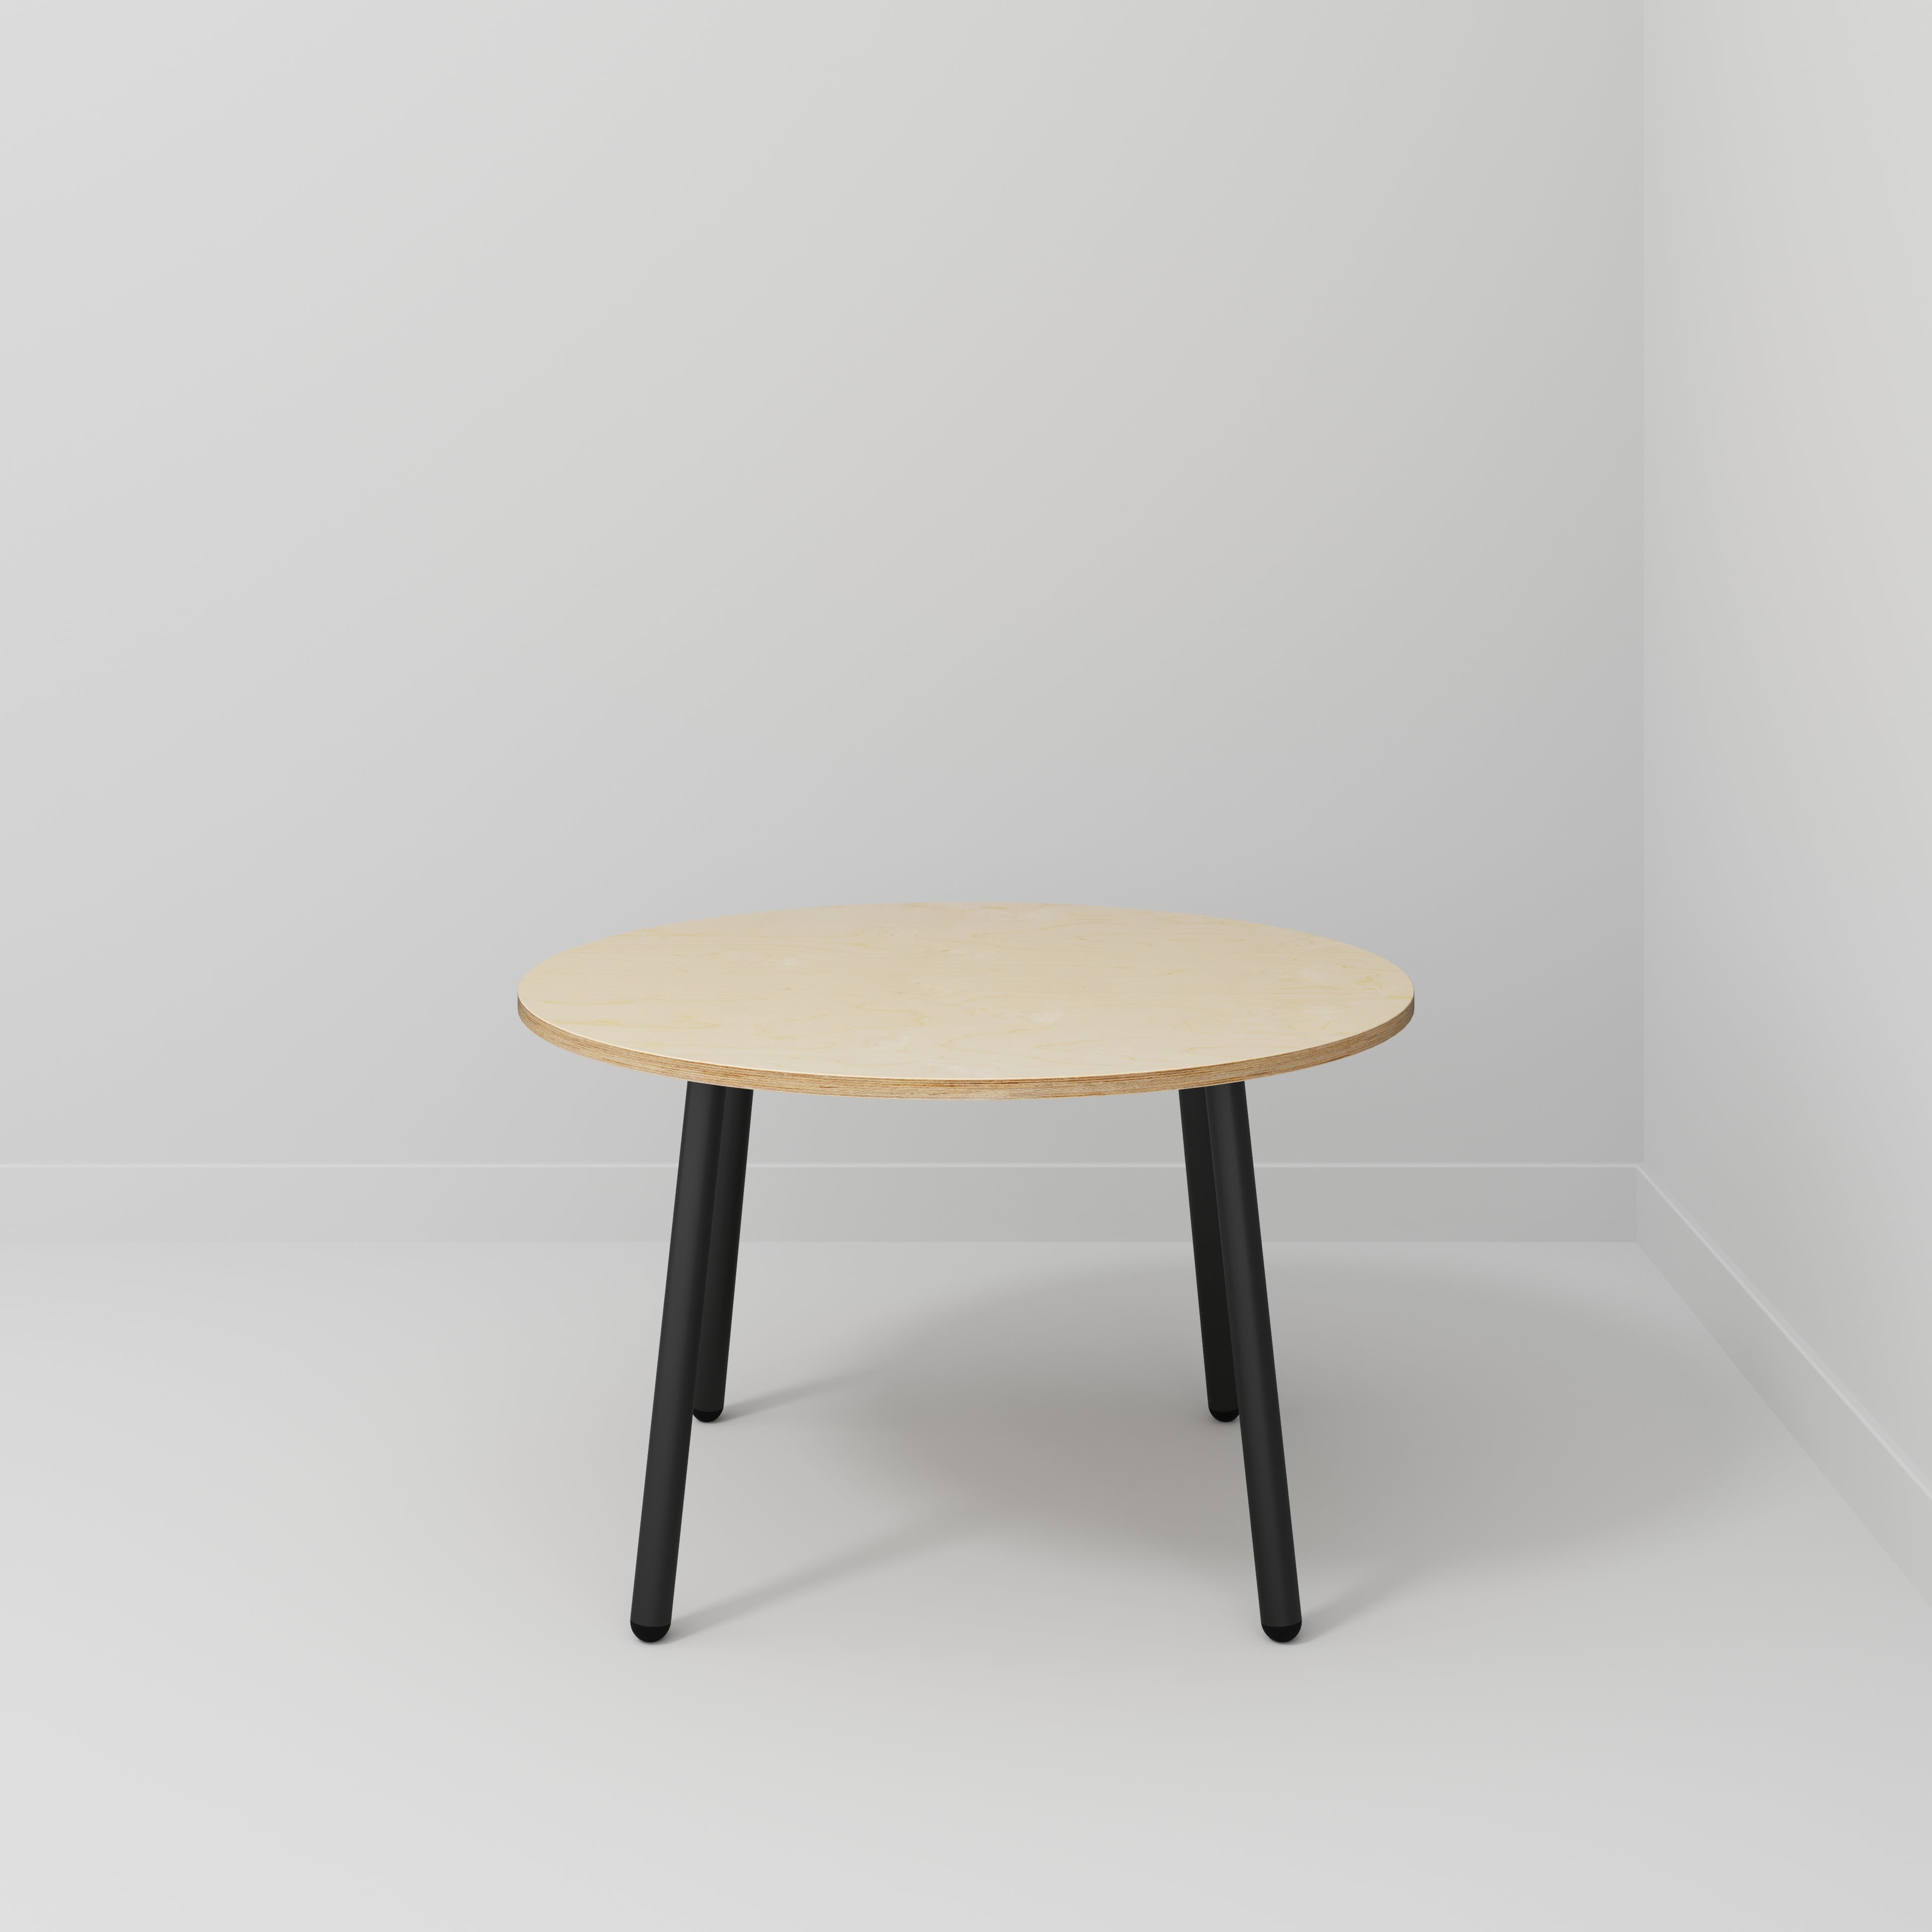 Custom Plywood Round Table with Round Single Pin Legs